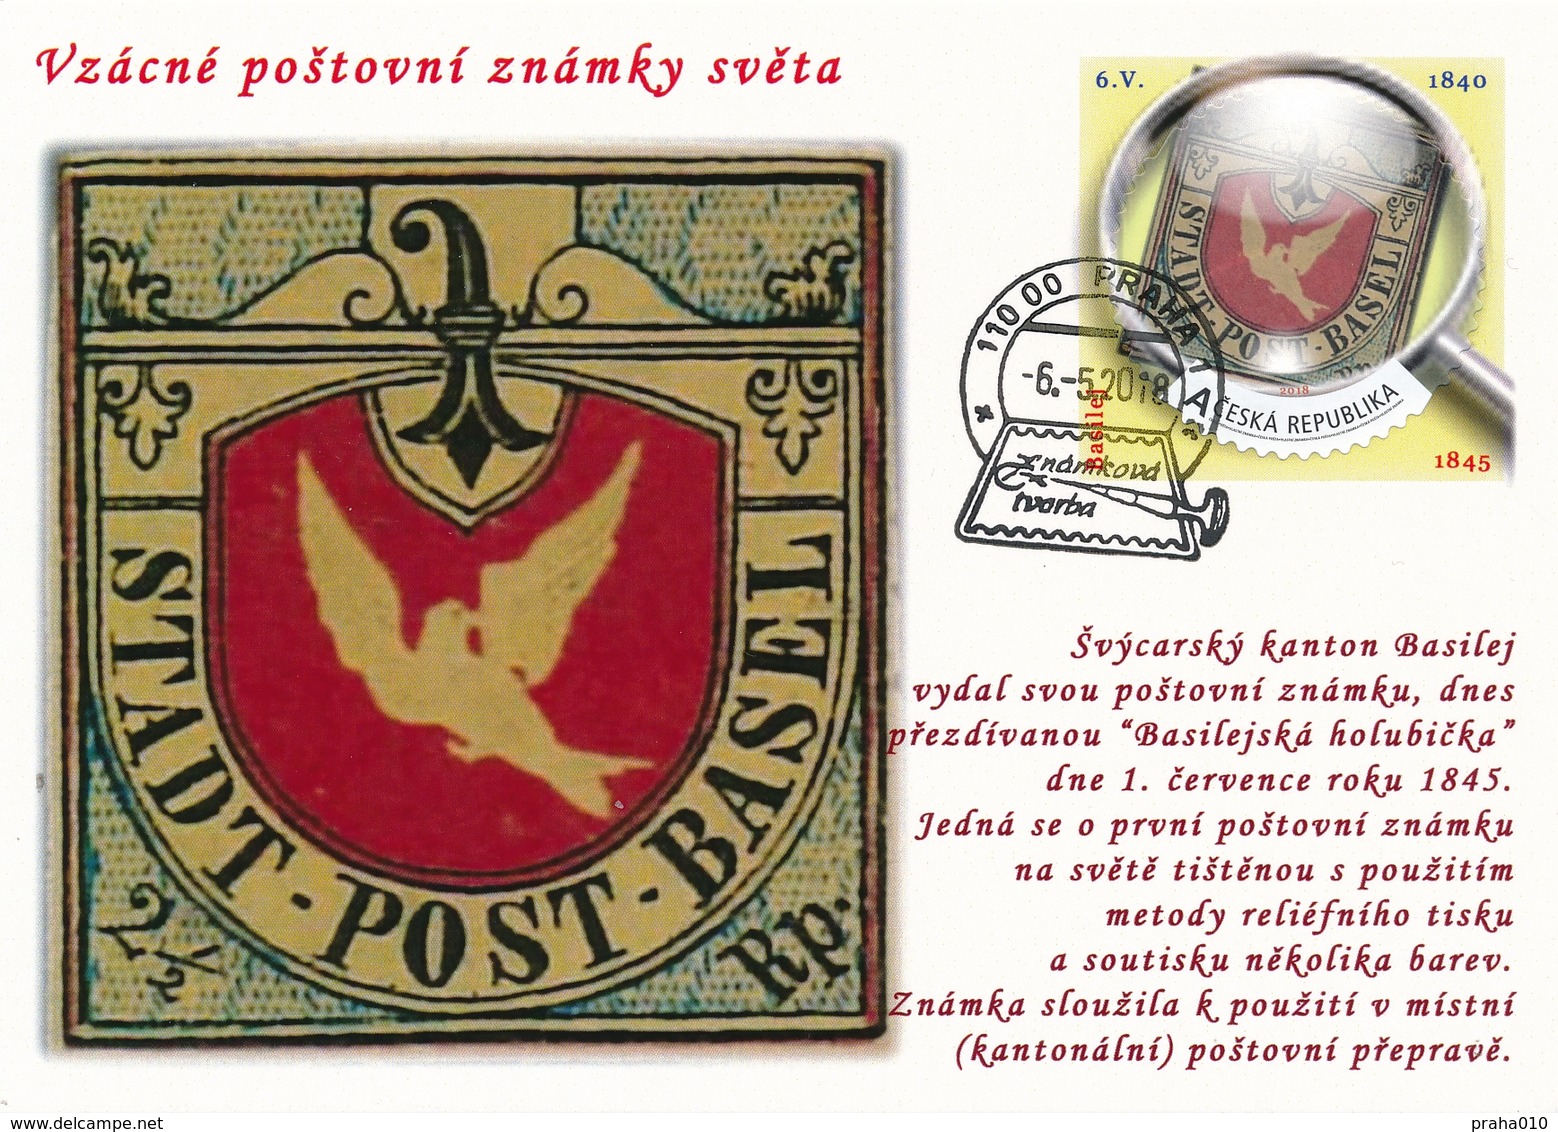 Czech rep. / My Own Stamps (2018) The world of philately (CM) Cartes maxima (complete set - 25 pcs.)